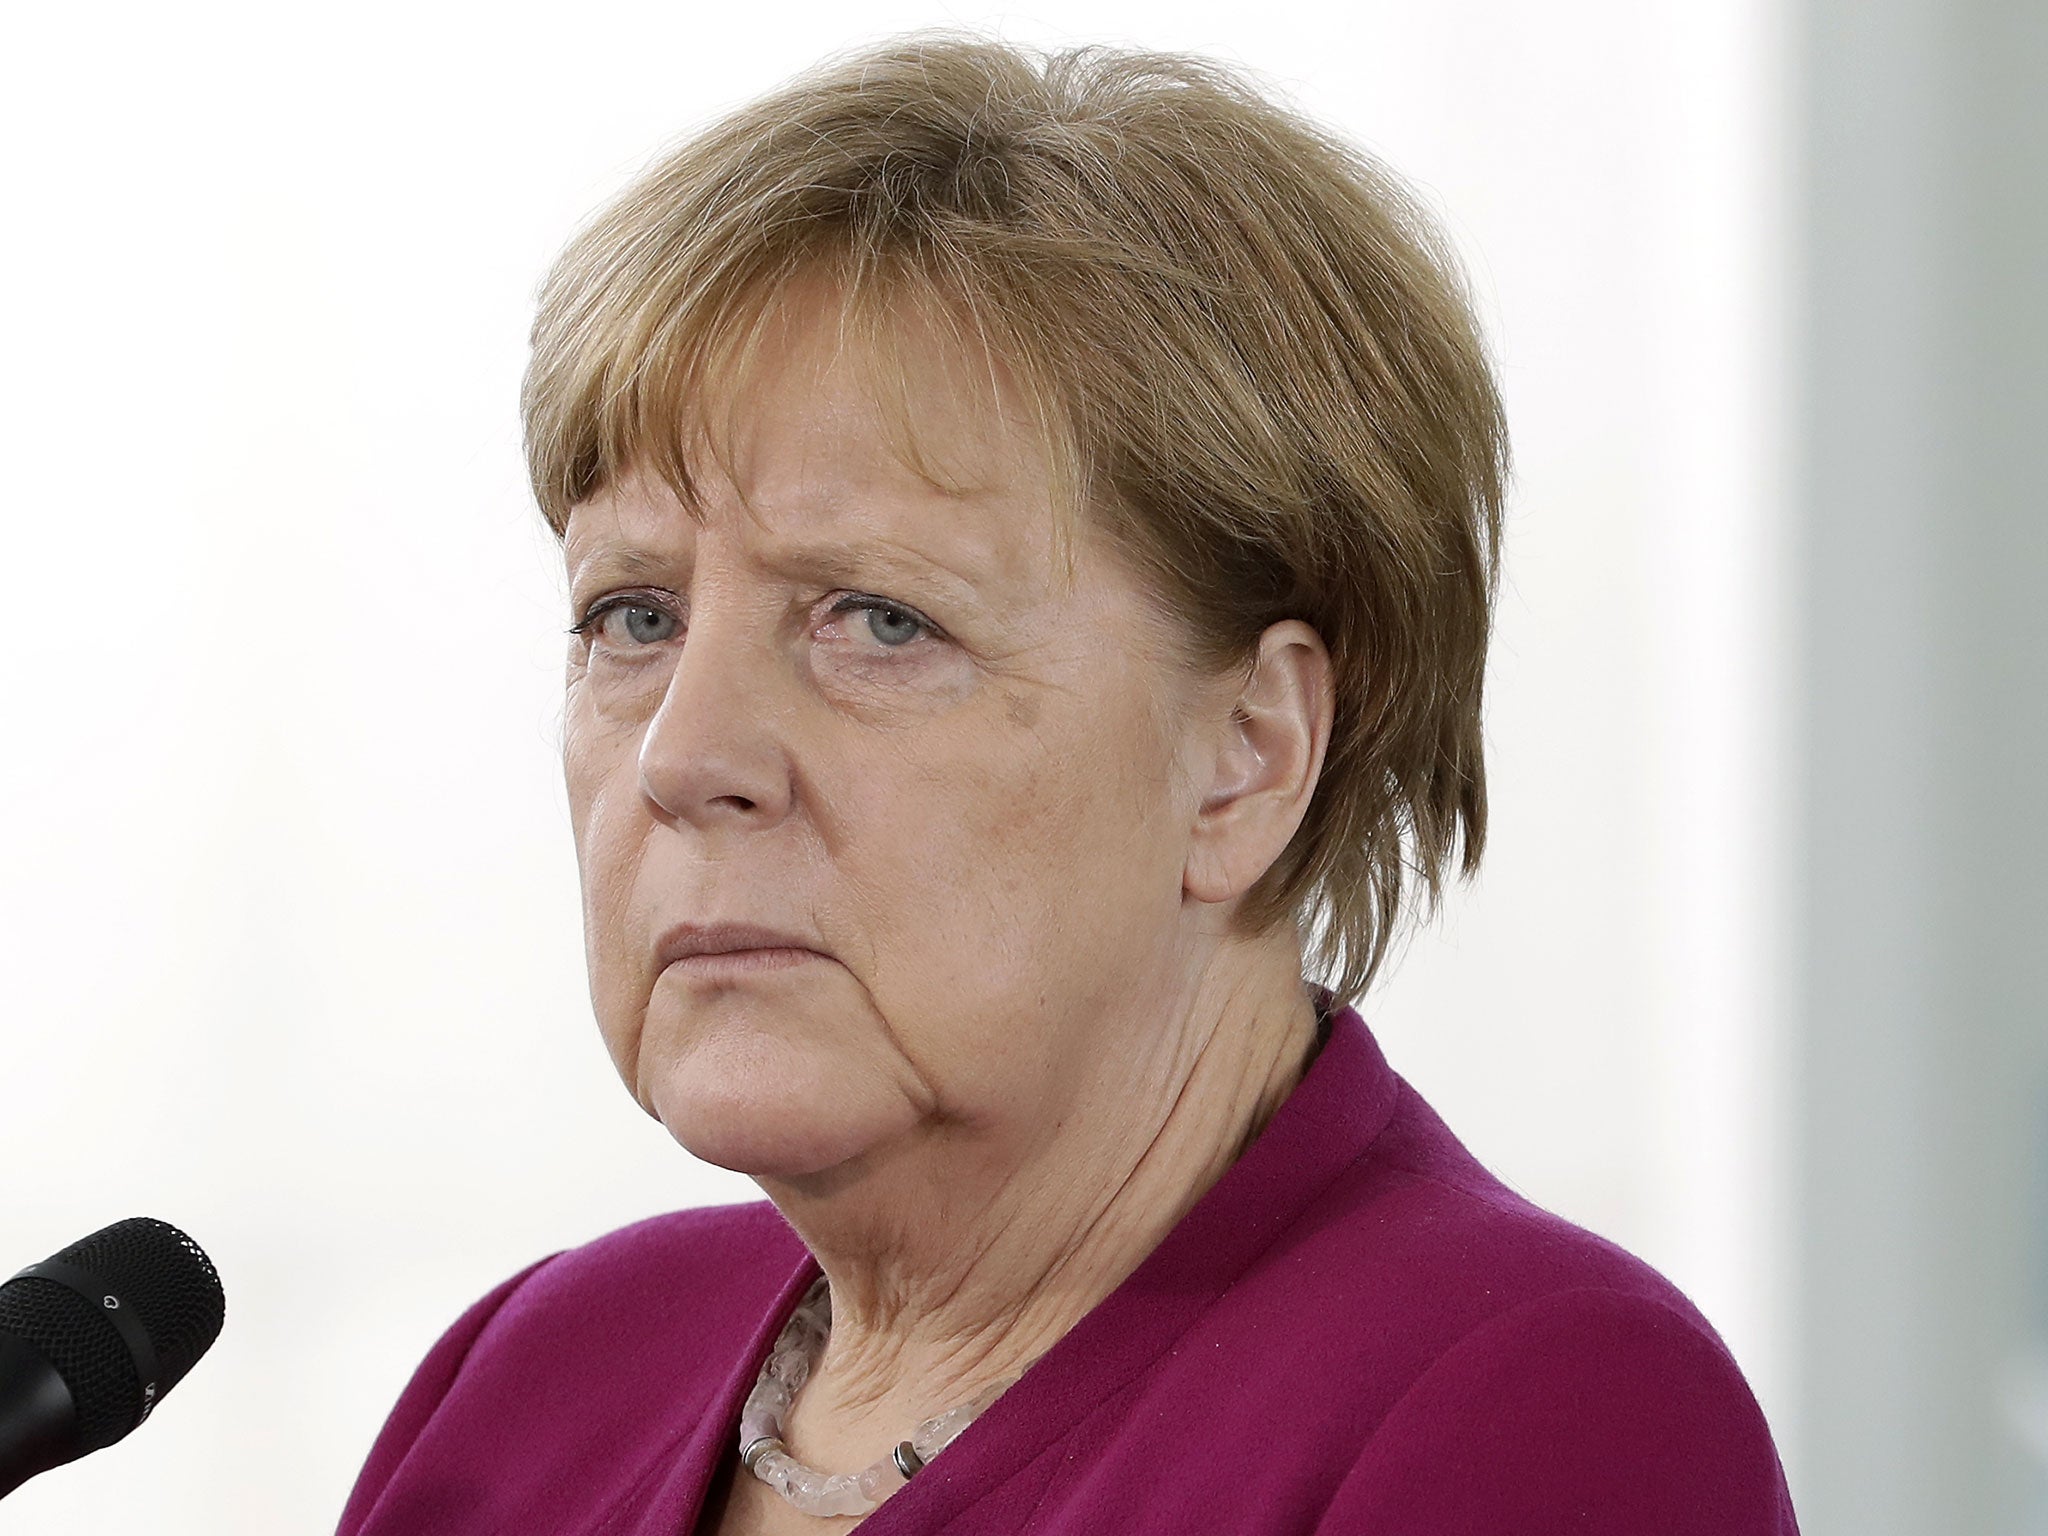 Angela Merkel has vowed the government would respond 'with full force and resolve' against antisemitism in Germany